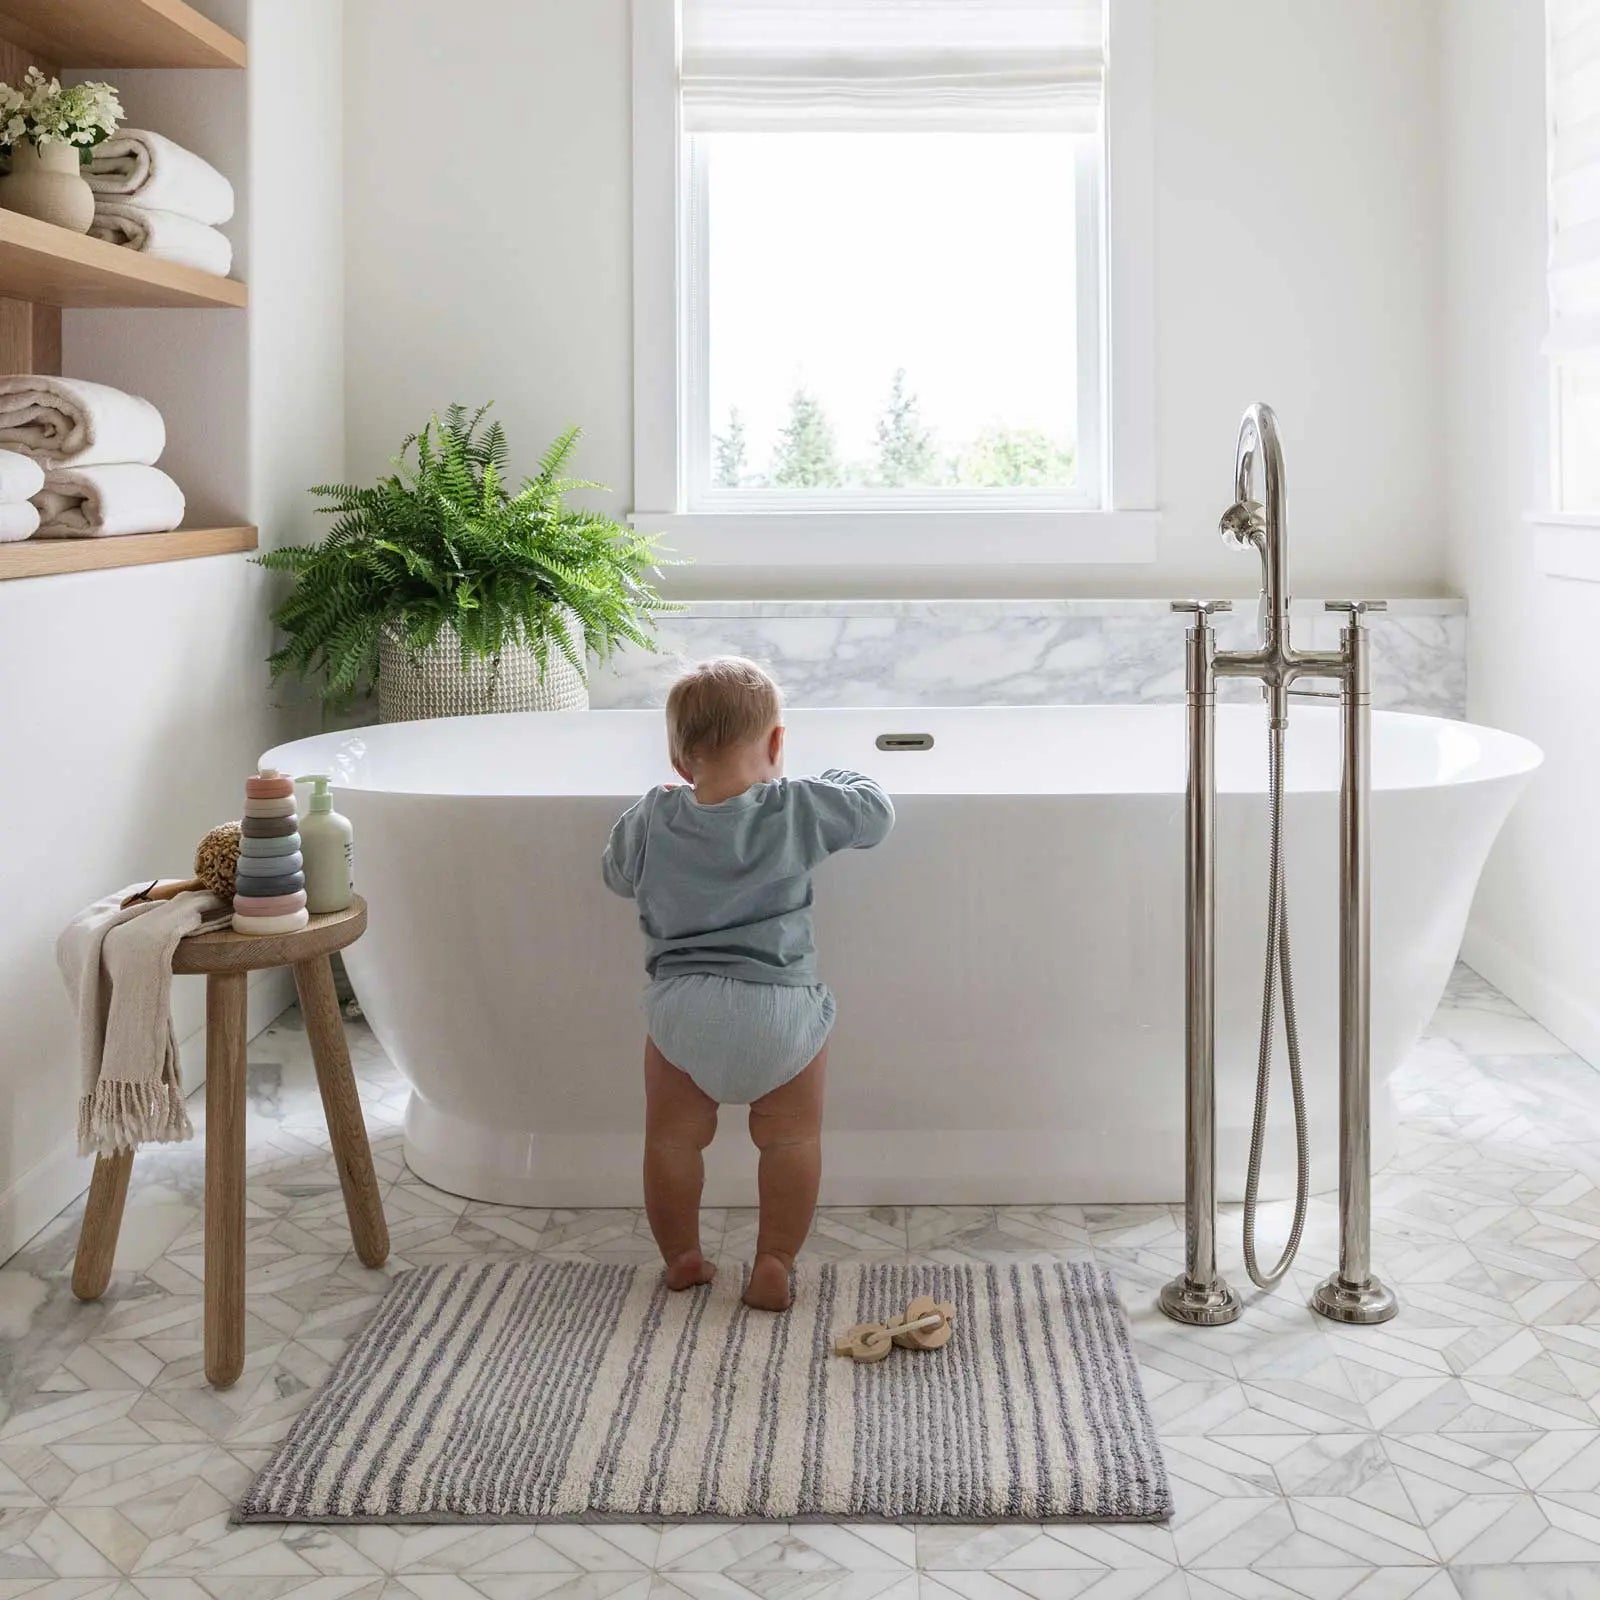 Coastal Nantucket blue and white stripe bath mat in size 21x34 shown in a bathroom in front of a tub with baby standing up on the mat pulling themselves up on the tub